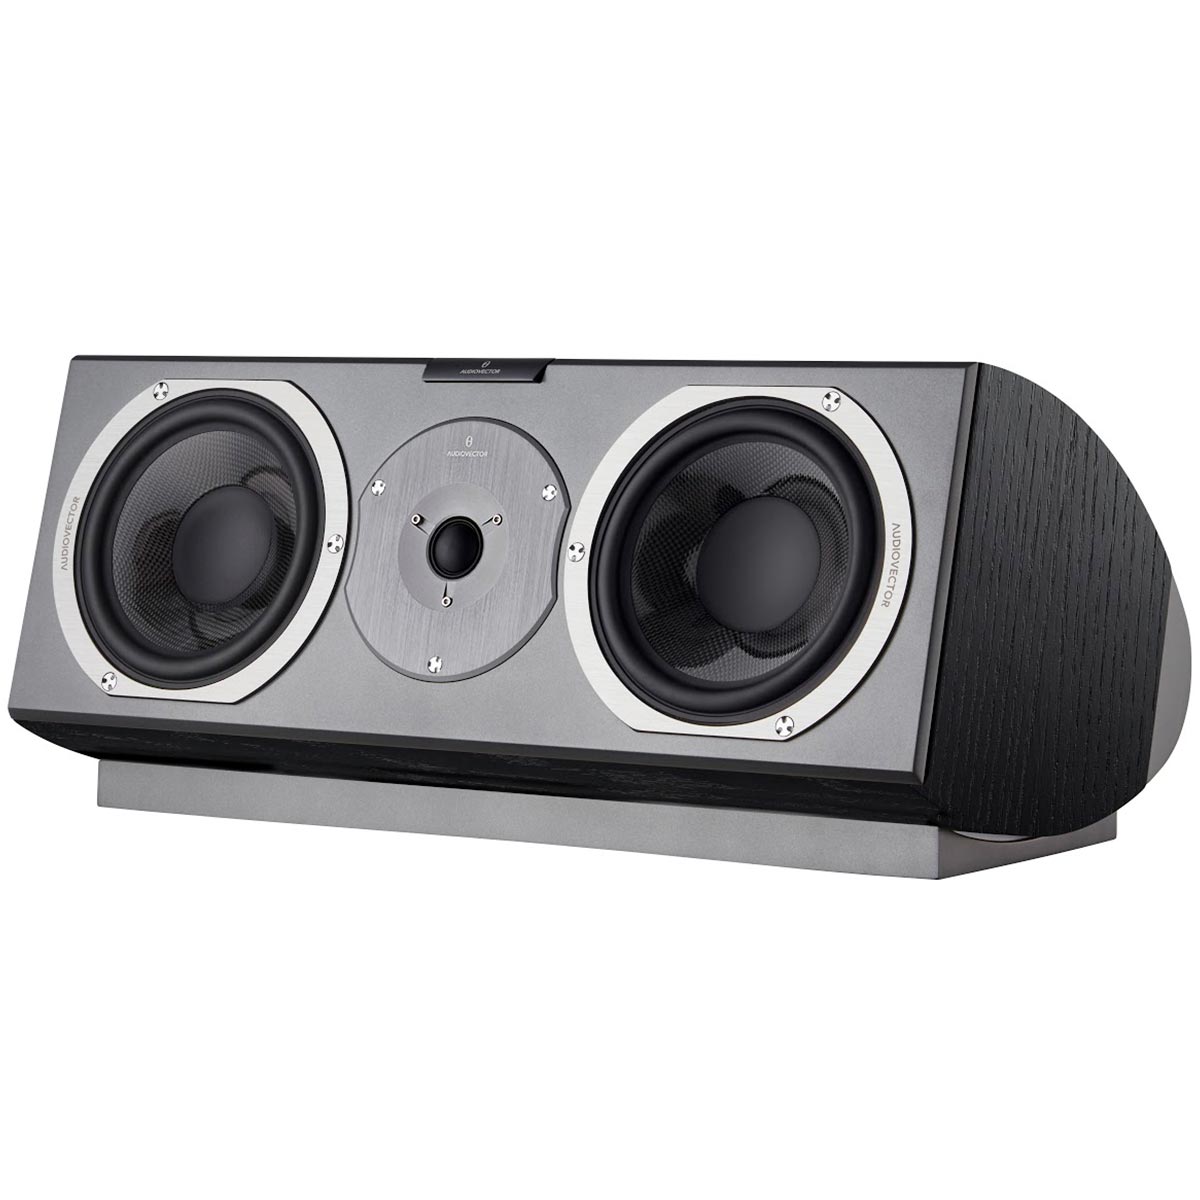 Центральные каналы Audiovector R C Signature Black Stained Ash центральные каналы audiovector qr c white